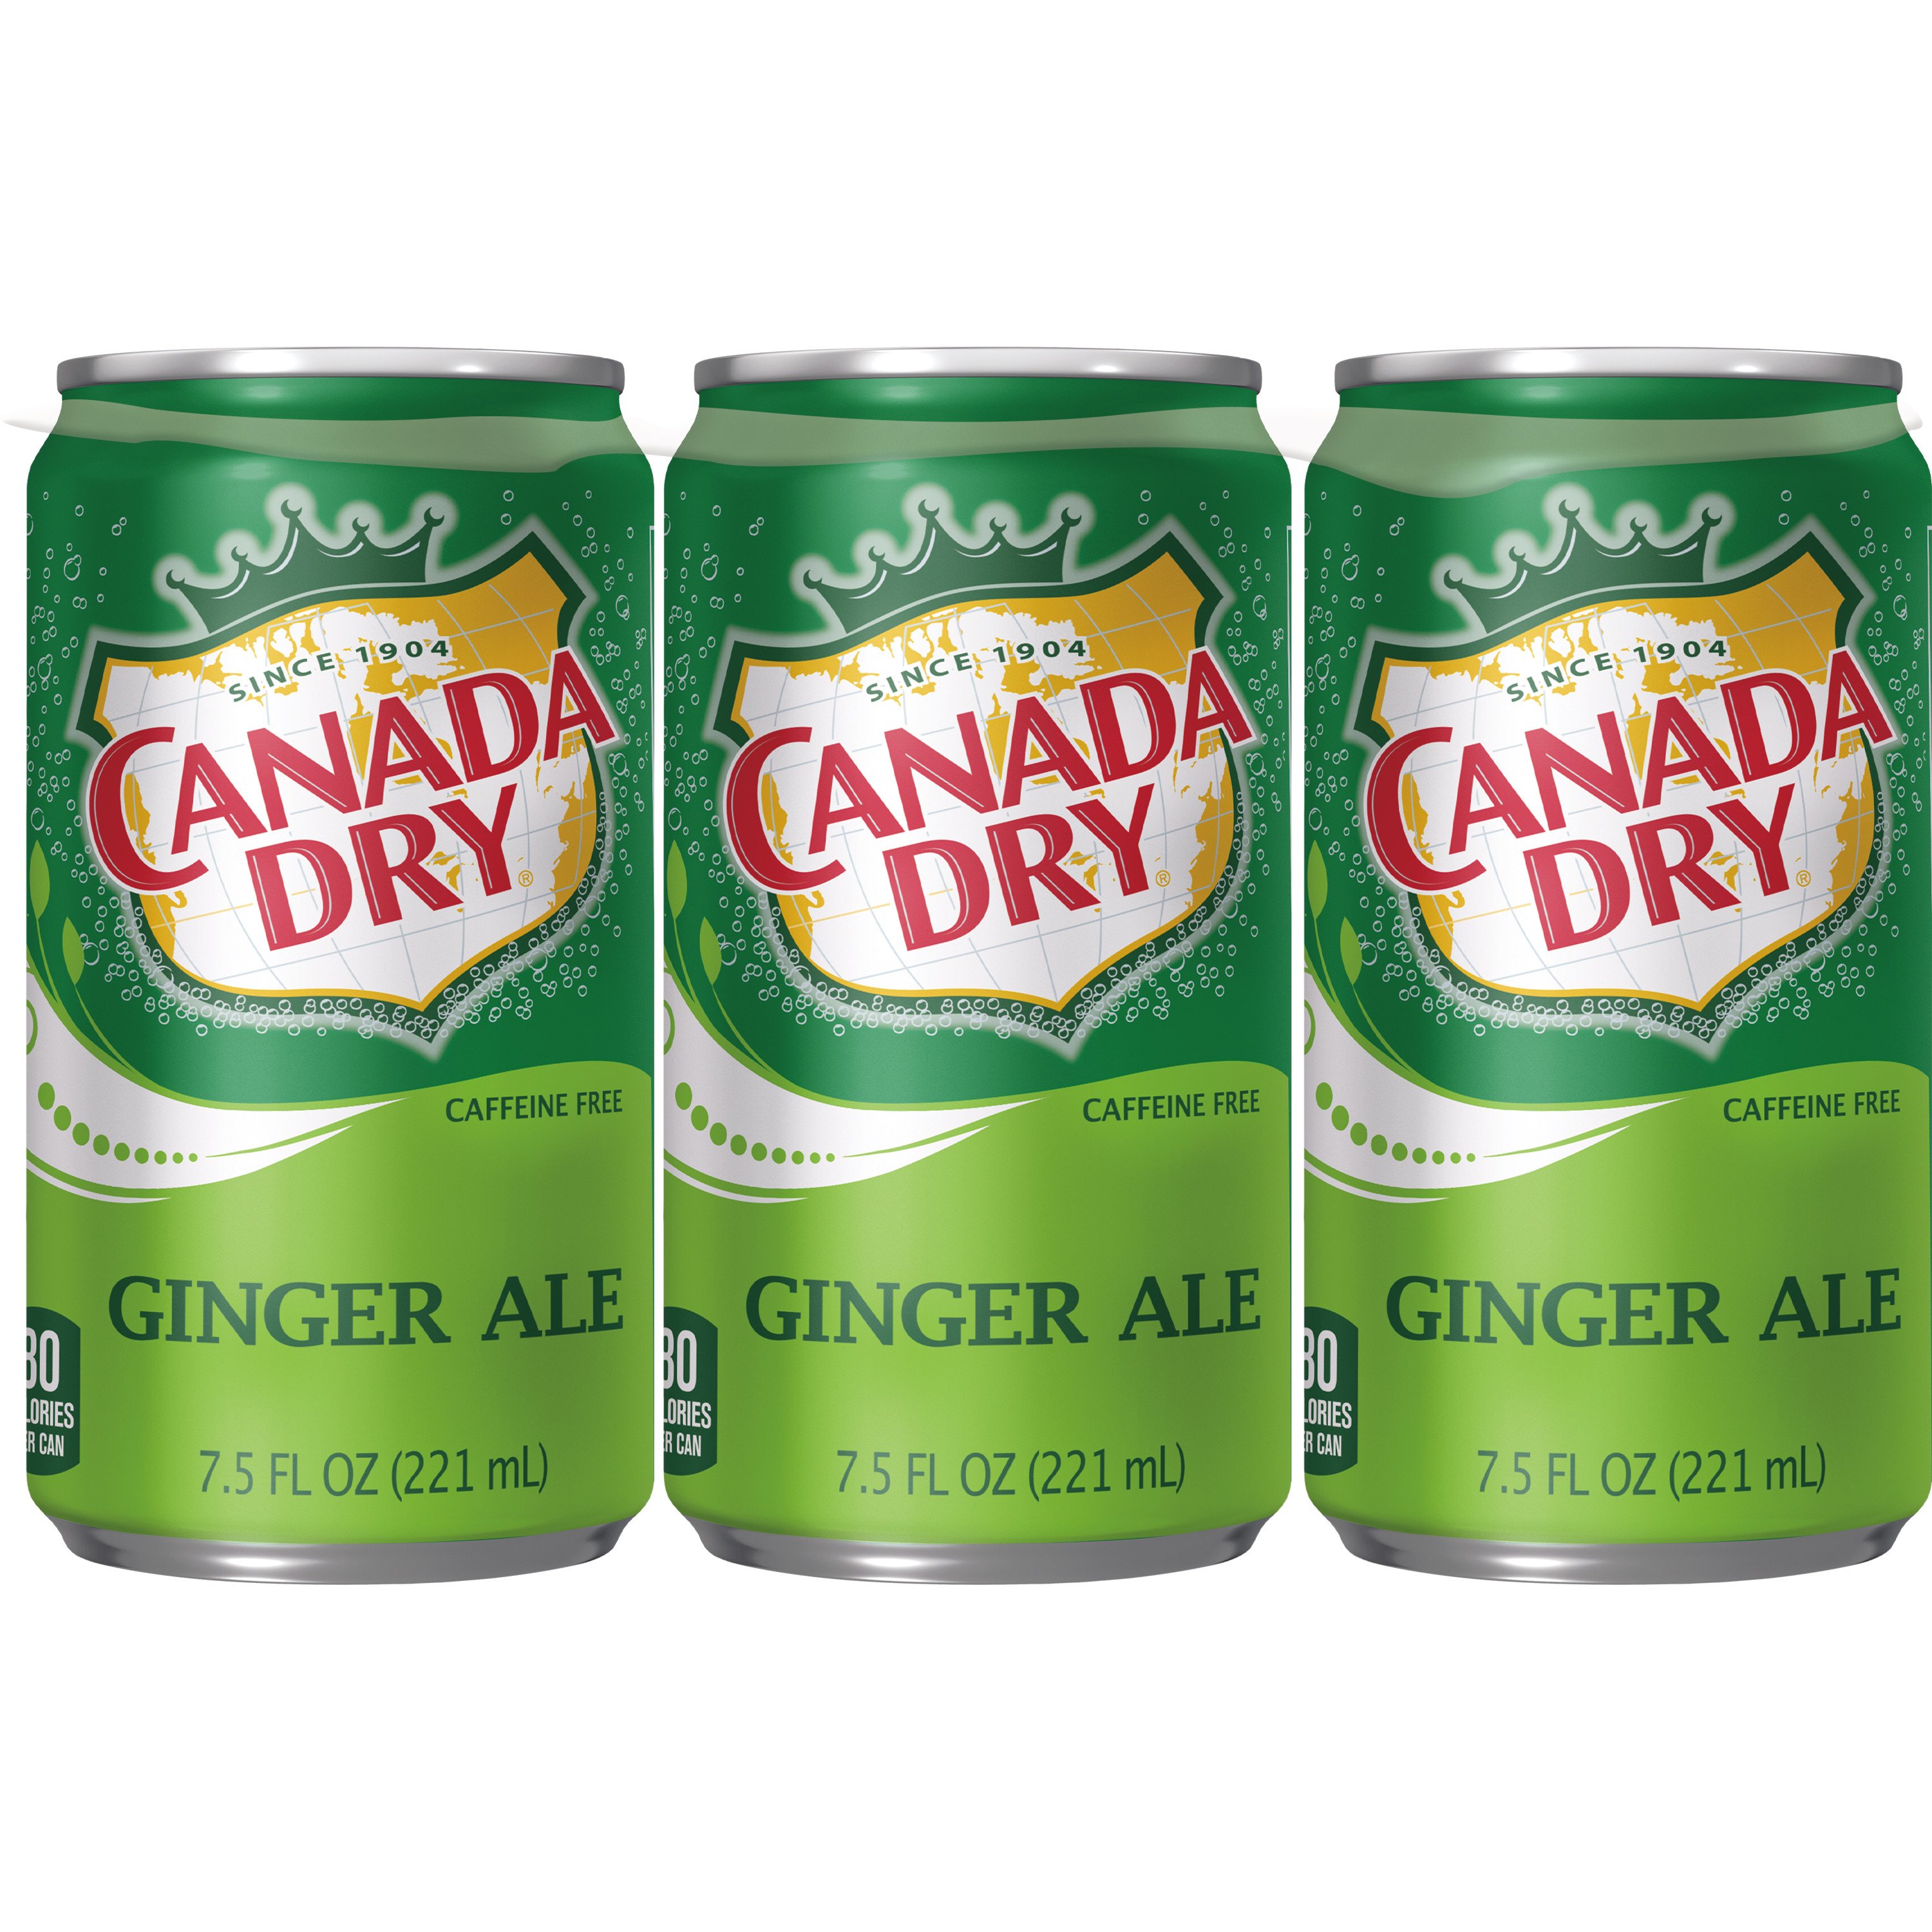 Canada Dry Bold Ginger Ale Ingredients Canada Dry Ginger Ale 7 5 Oz Cans Shop Soda At H E B